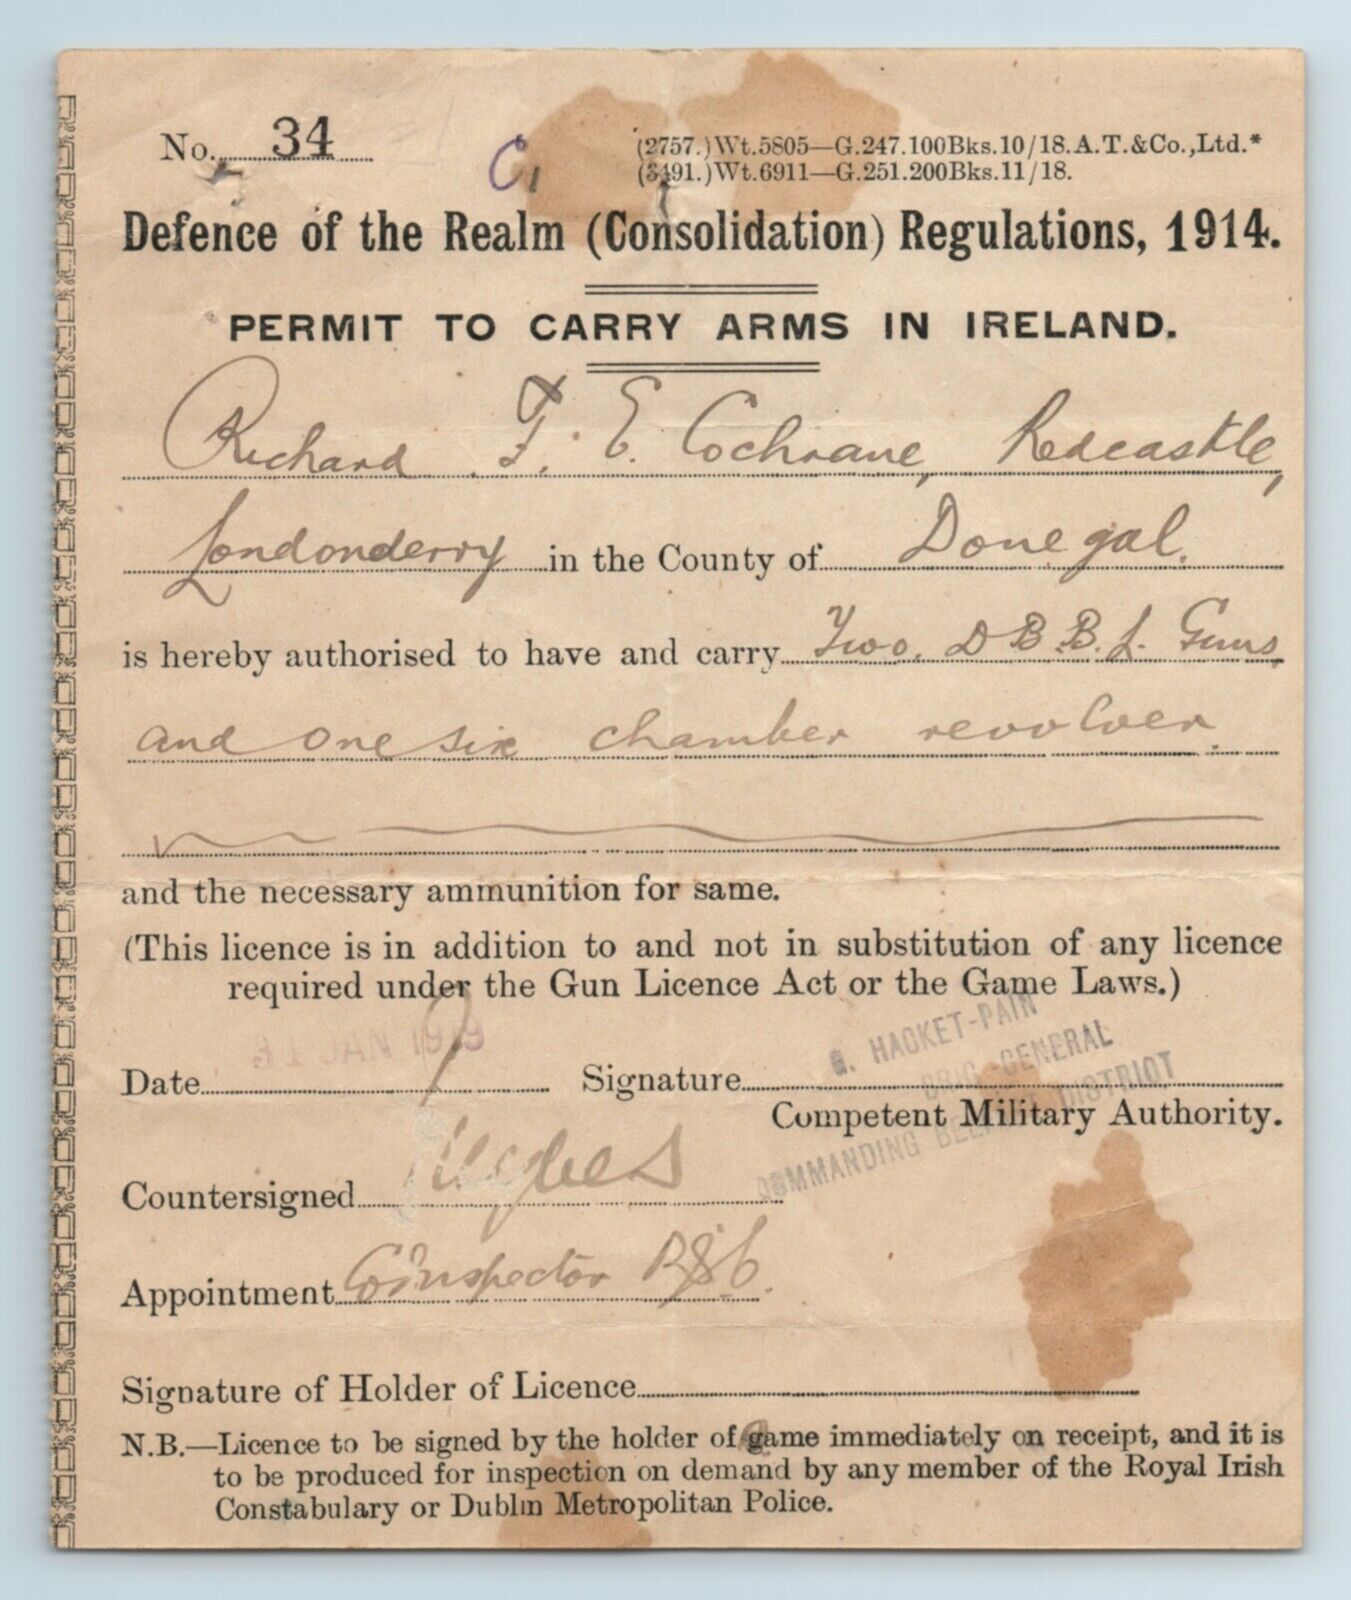 1919 Permit to Carry Arms in Ireland, Defence of the Realm Act, Richard Cochrane